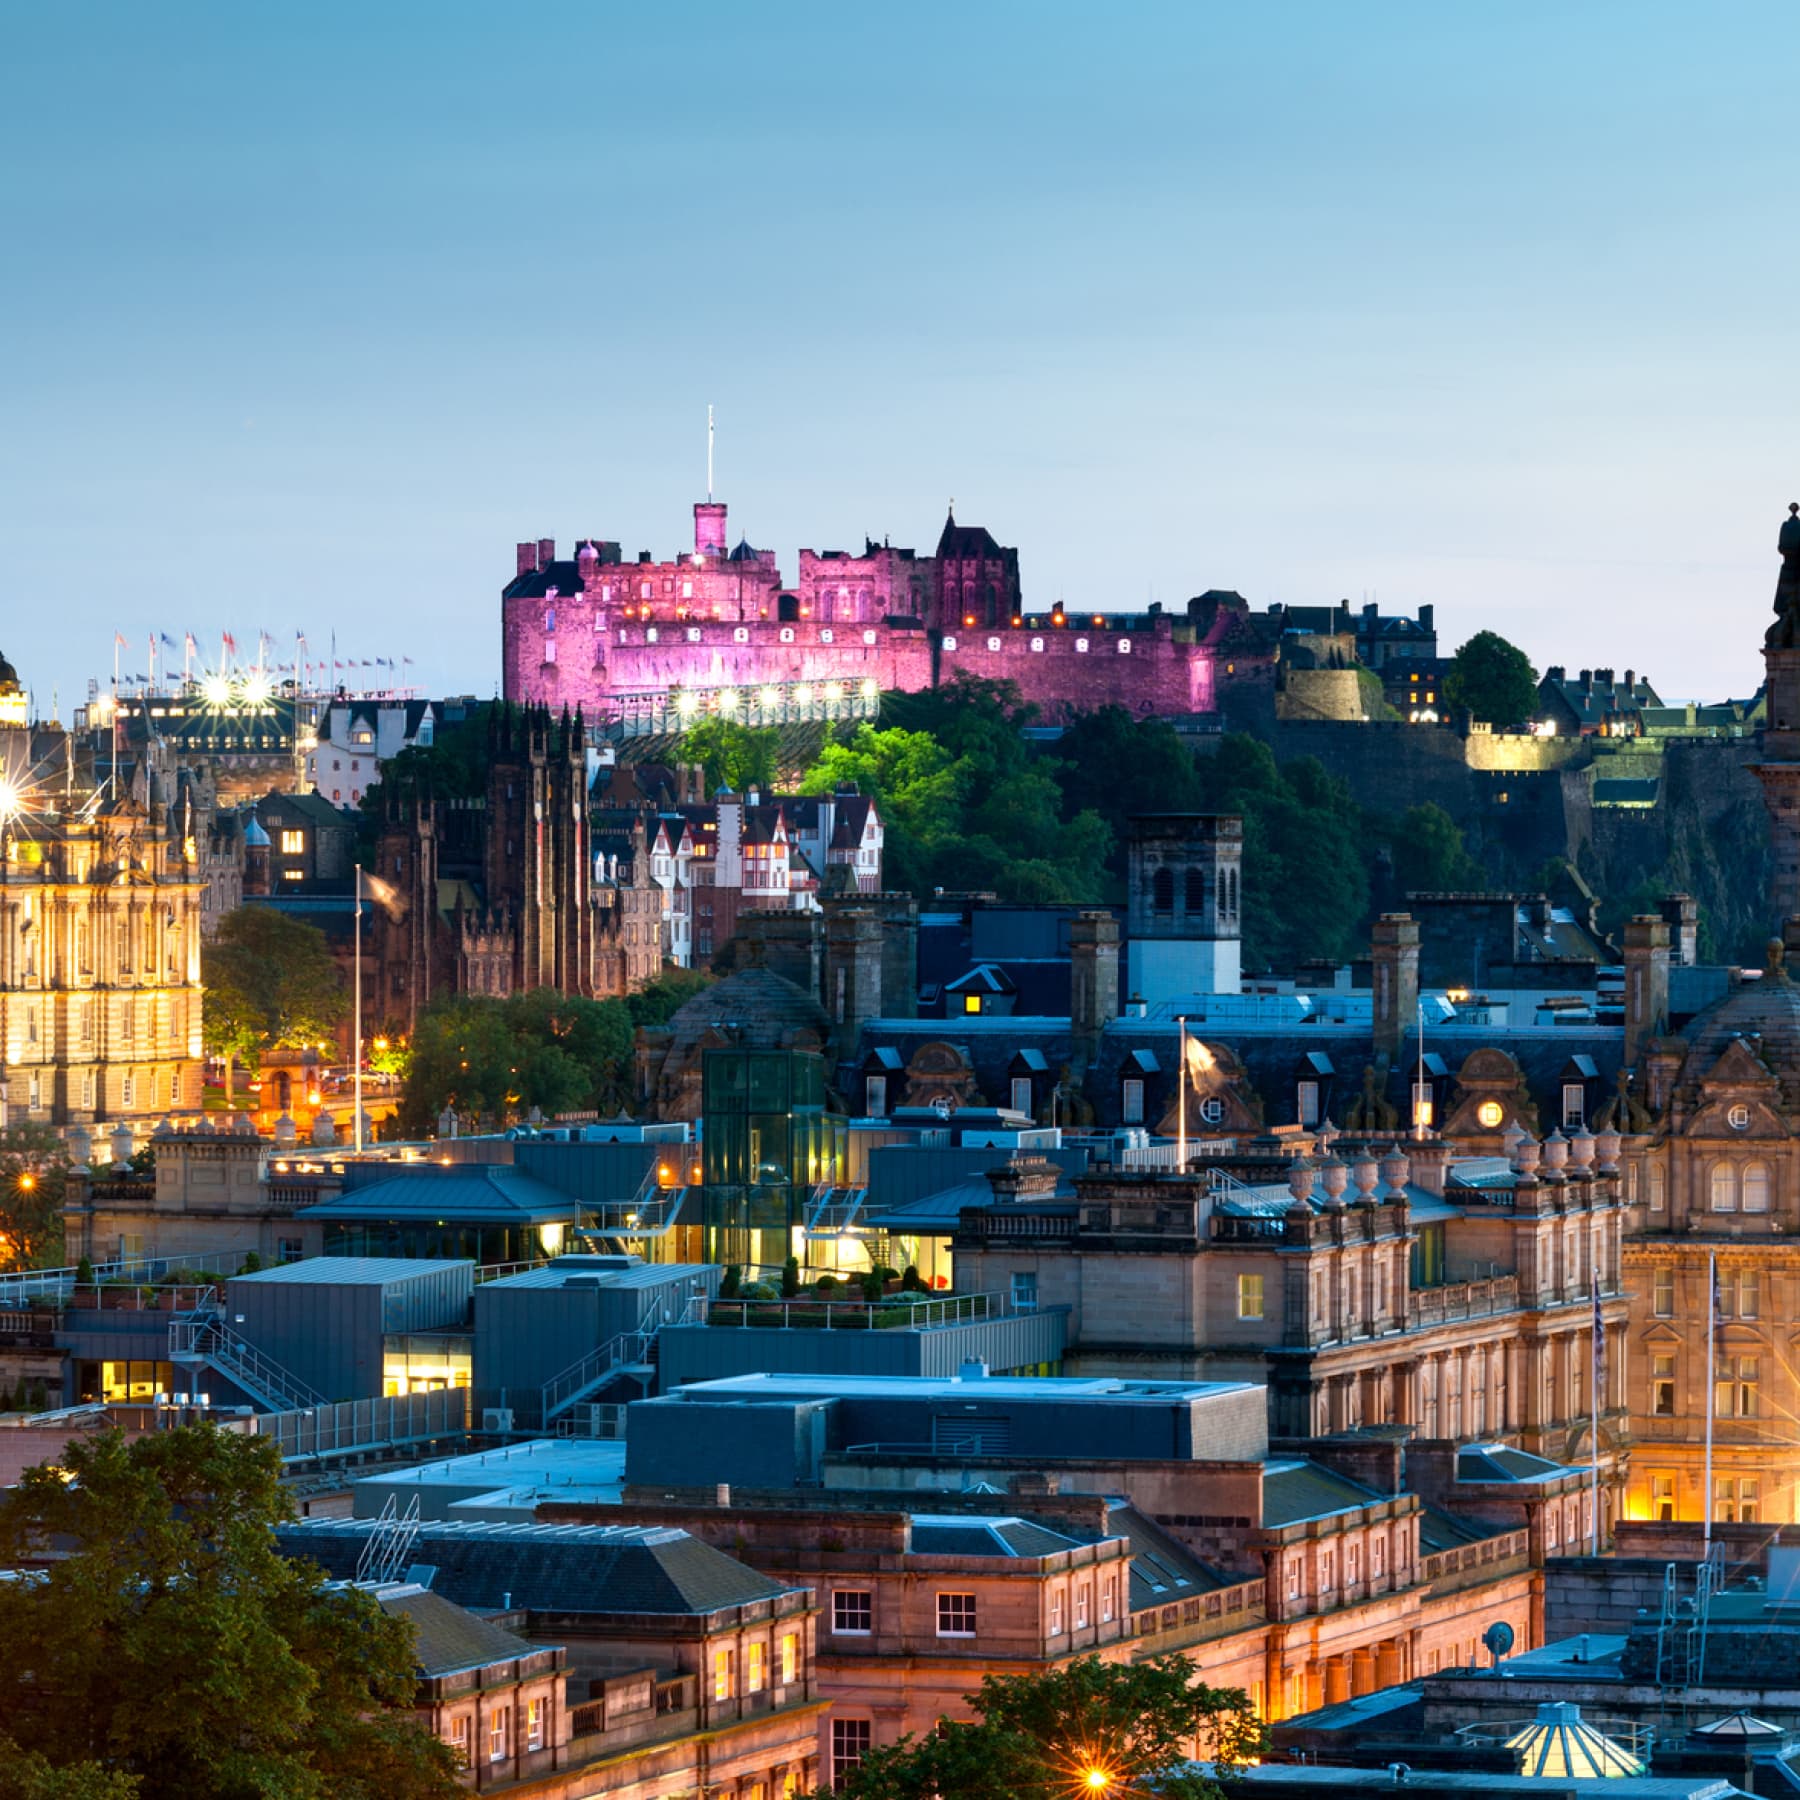 If you are looking for a staycation mixed with a stellar romantic city breaks, why not consider Edinburgh?